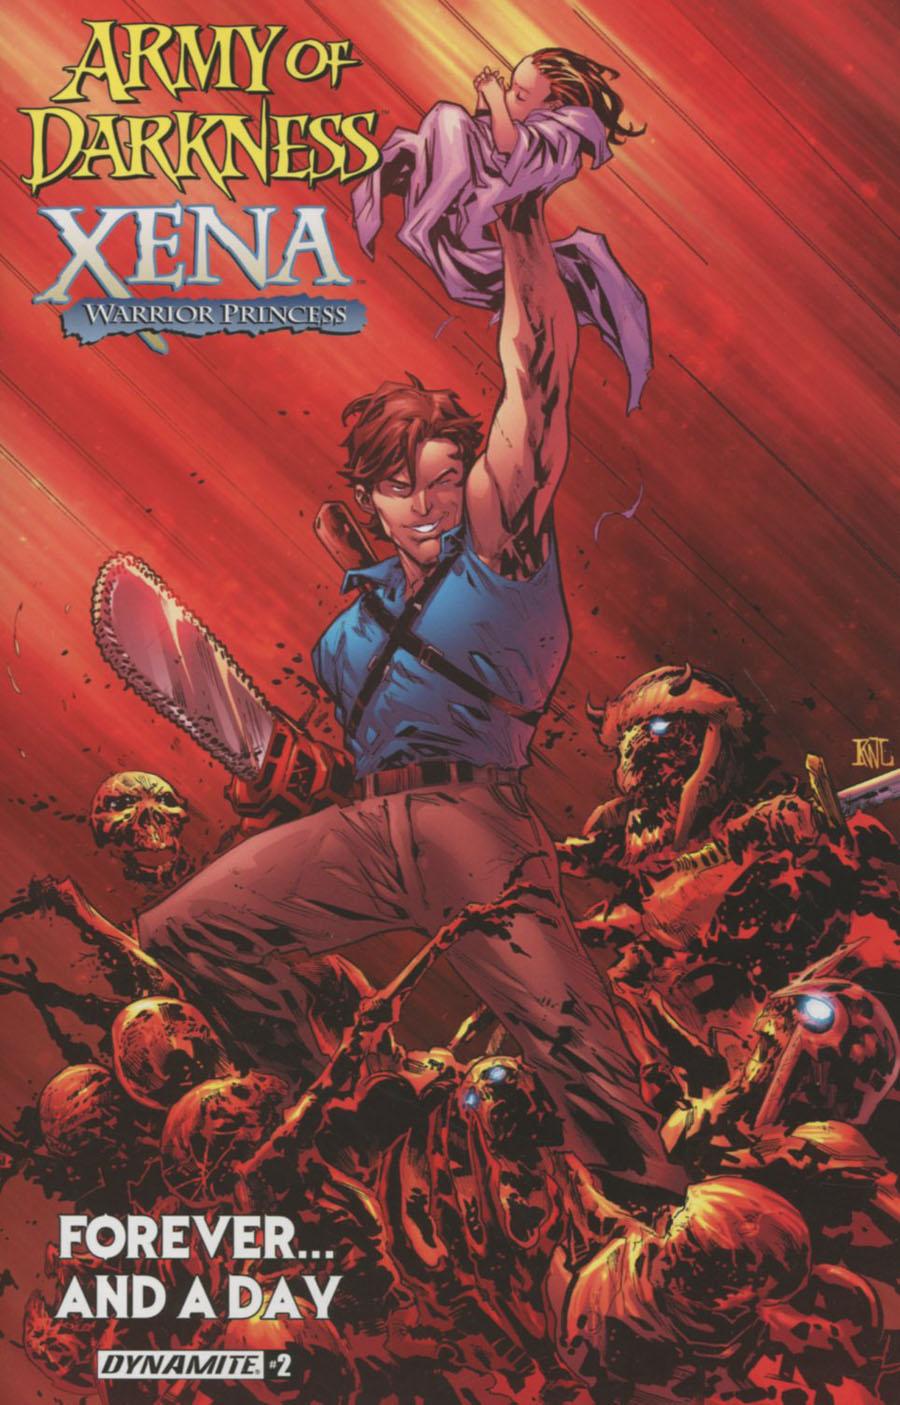 Army Of Darkness Xena Forever And A Day Vol. 1 #2